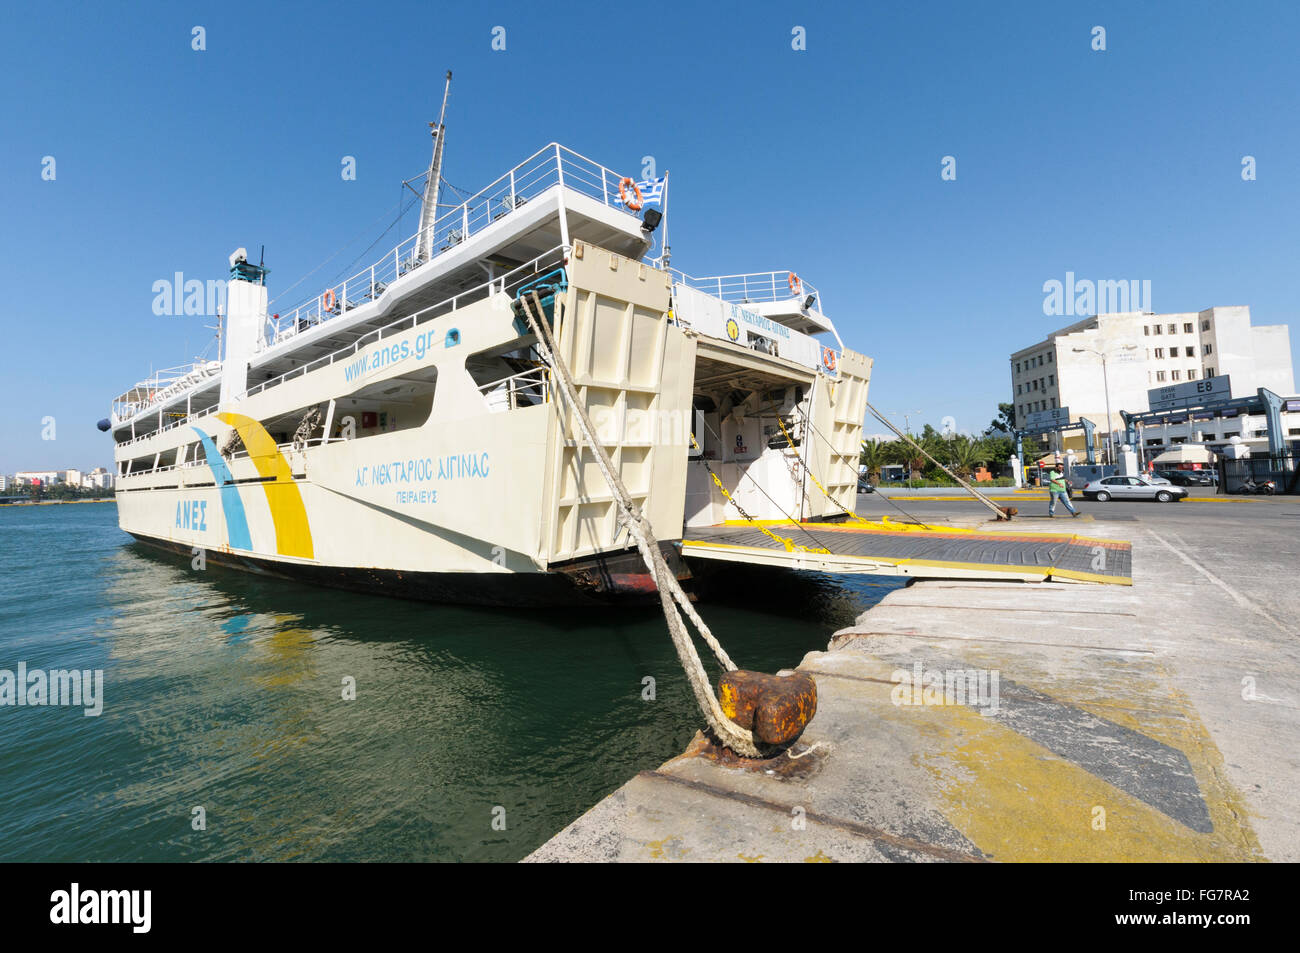 A roll-on/roll-off ferry with the stern ramp down at the port of Piraeus, Athens, Greece. Stock Photo